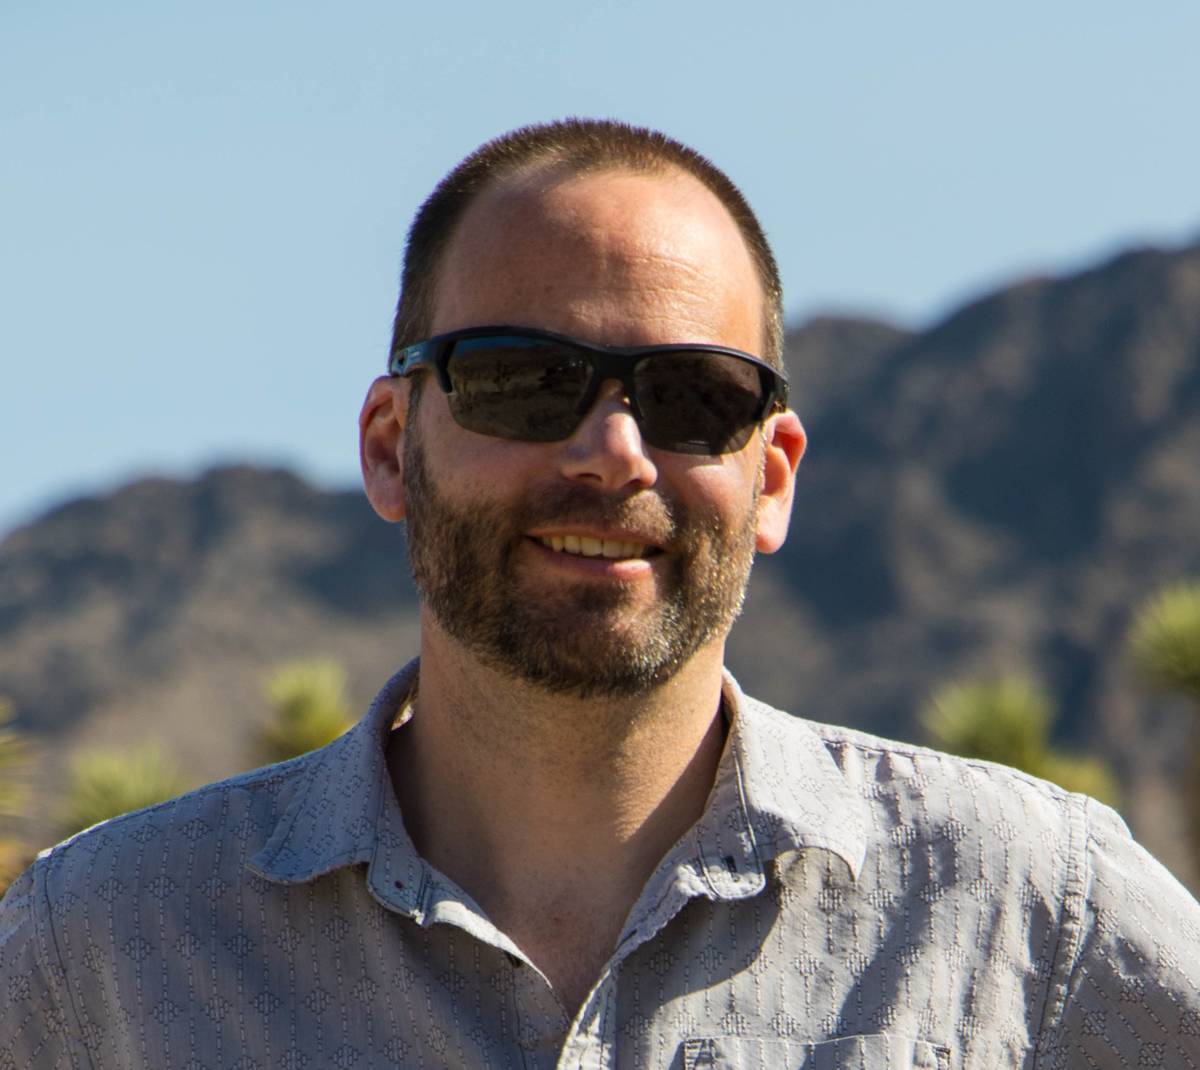 Matthew Lachniet is a UNLV climate scientist and lead researcher on a climate change study. (UNLV)